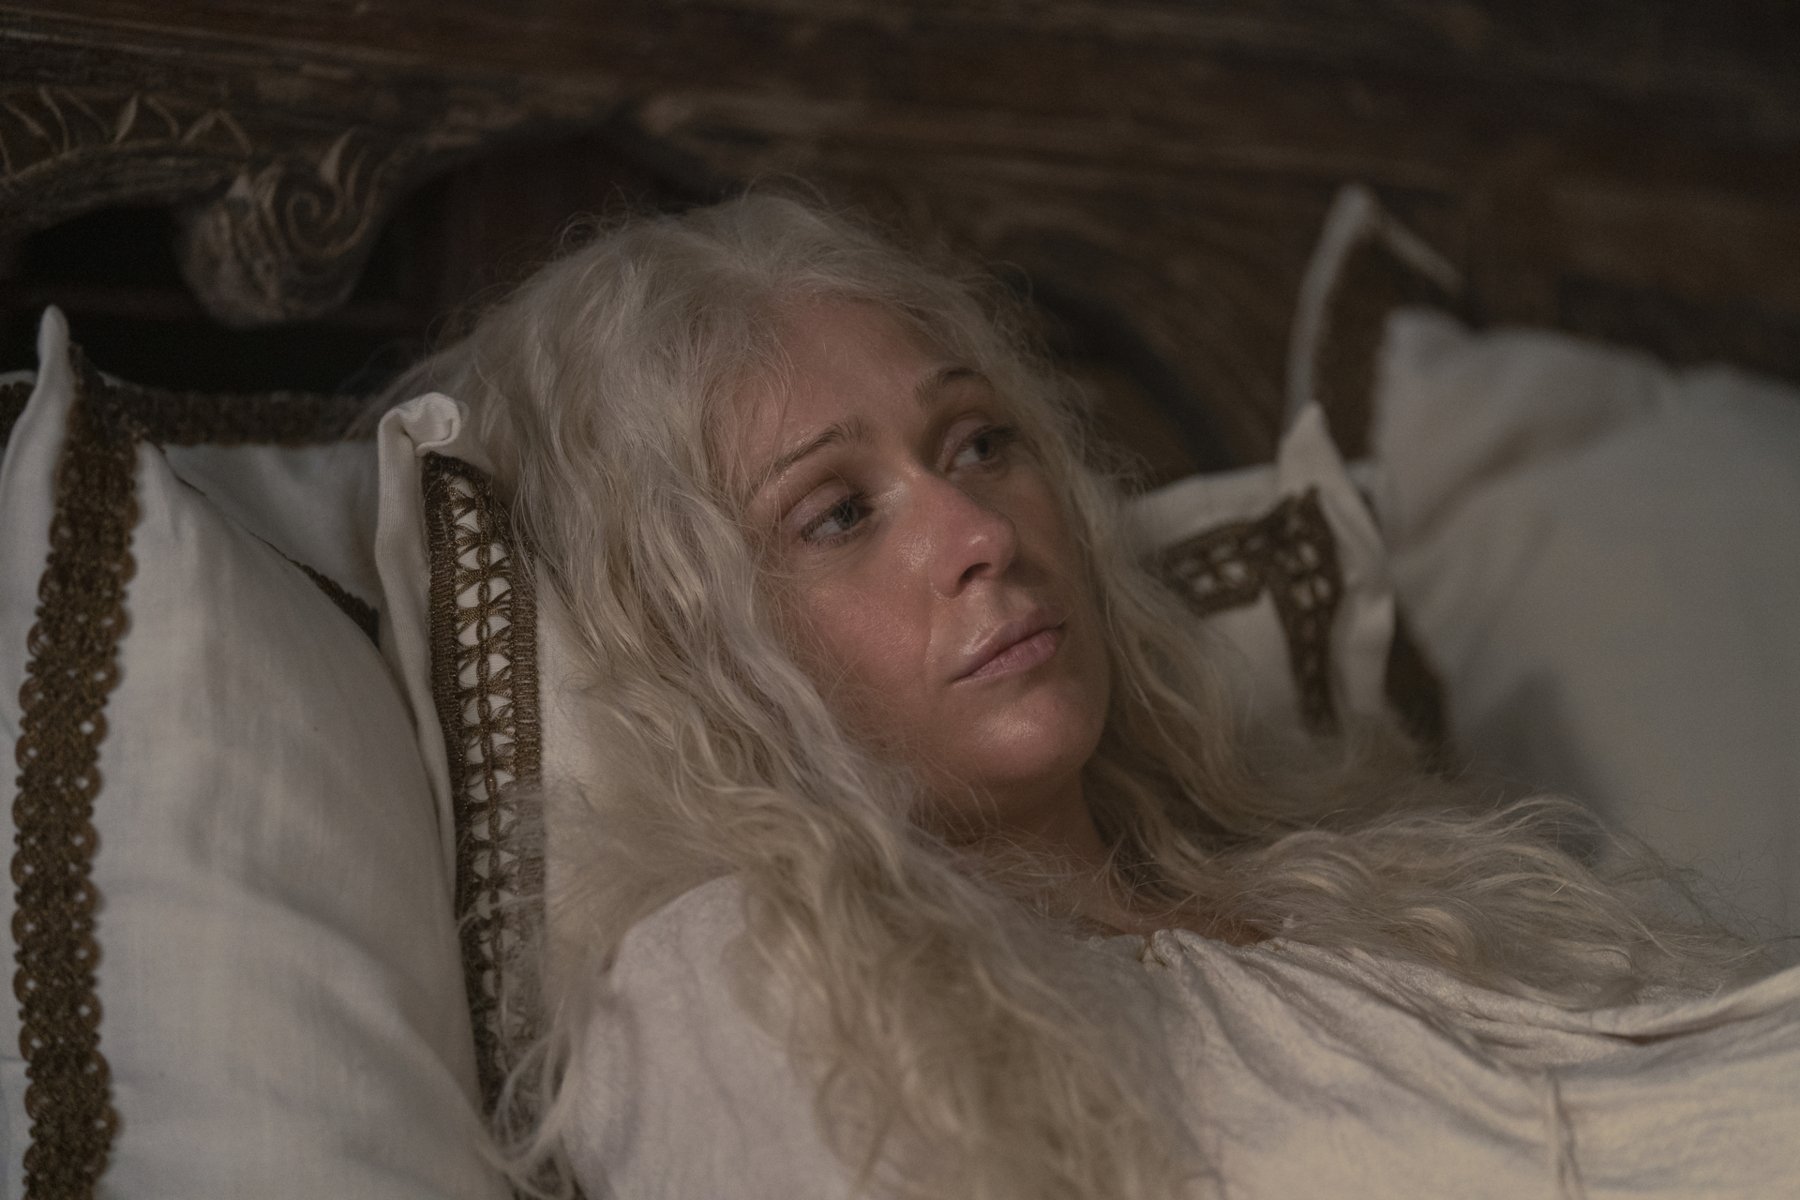 Sian Brooke as Aemma Arryn in 'House of the Dragon,' which has a controversial birth scene in its premire. She's lying on a bed with her hair messy and face sweaty.